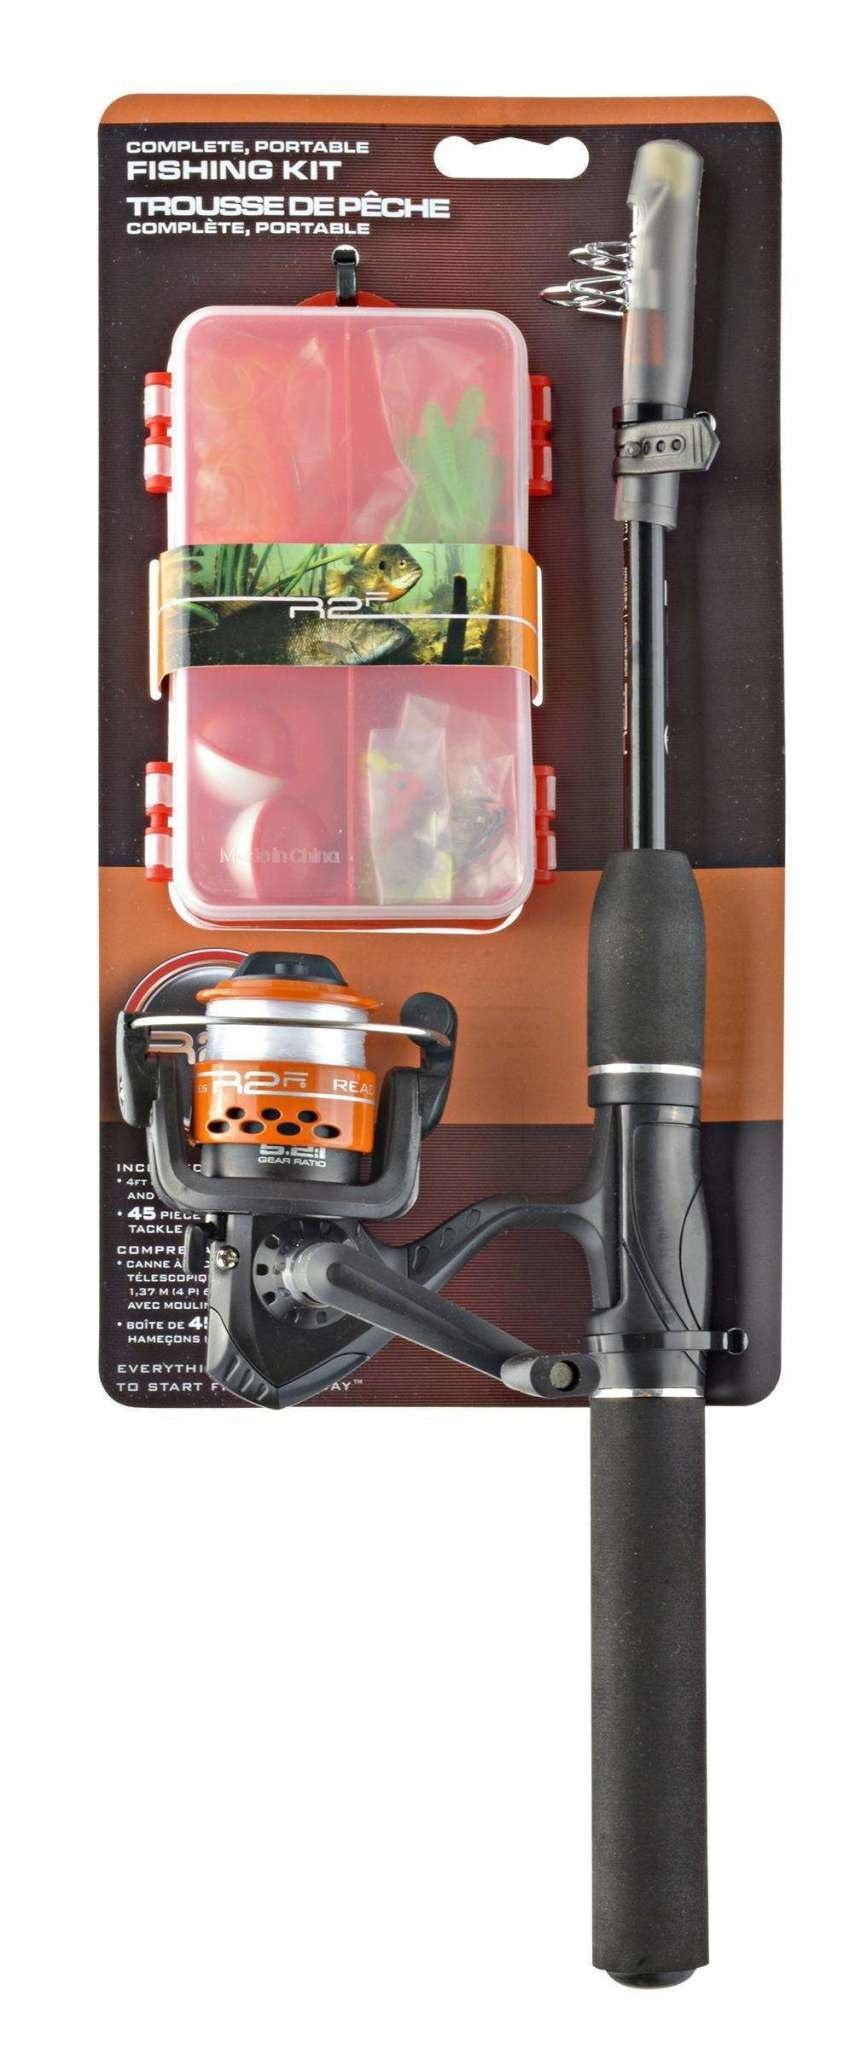 Ready 2 fish Complete, Portable Fishing Kit - Backcountry Supplies